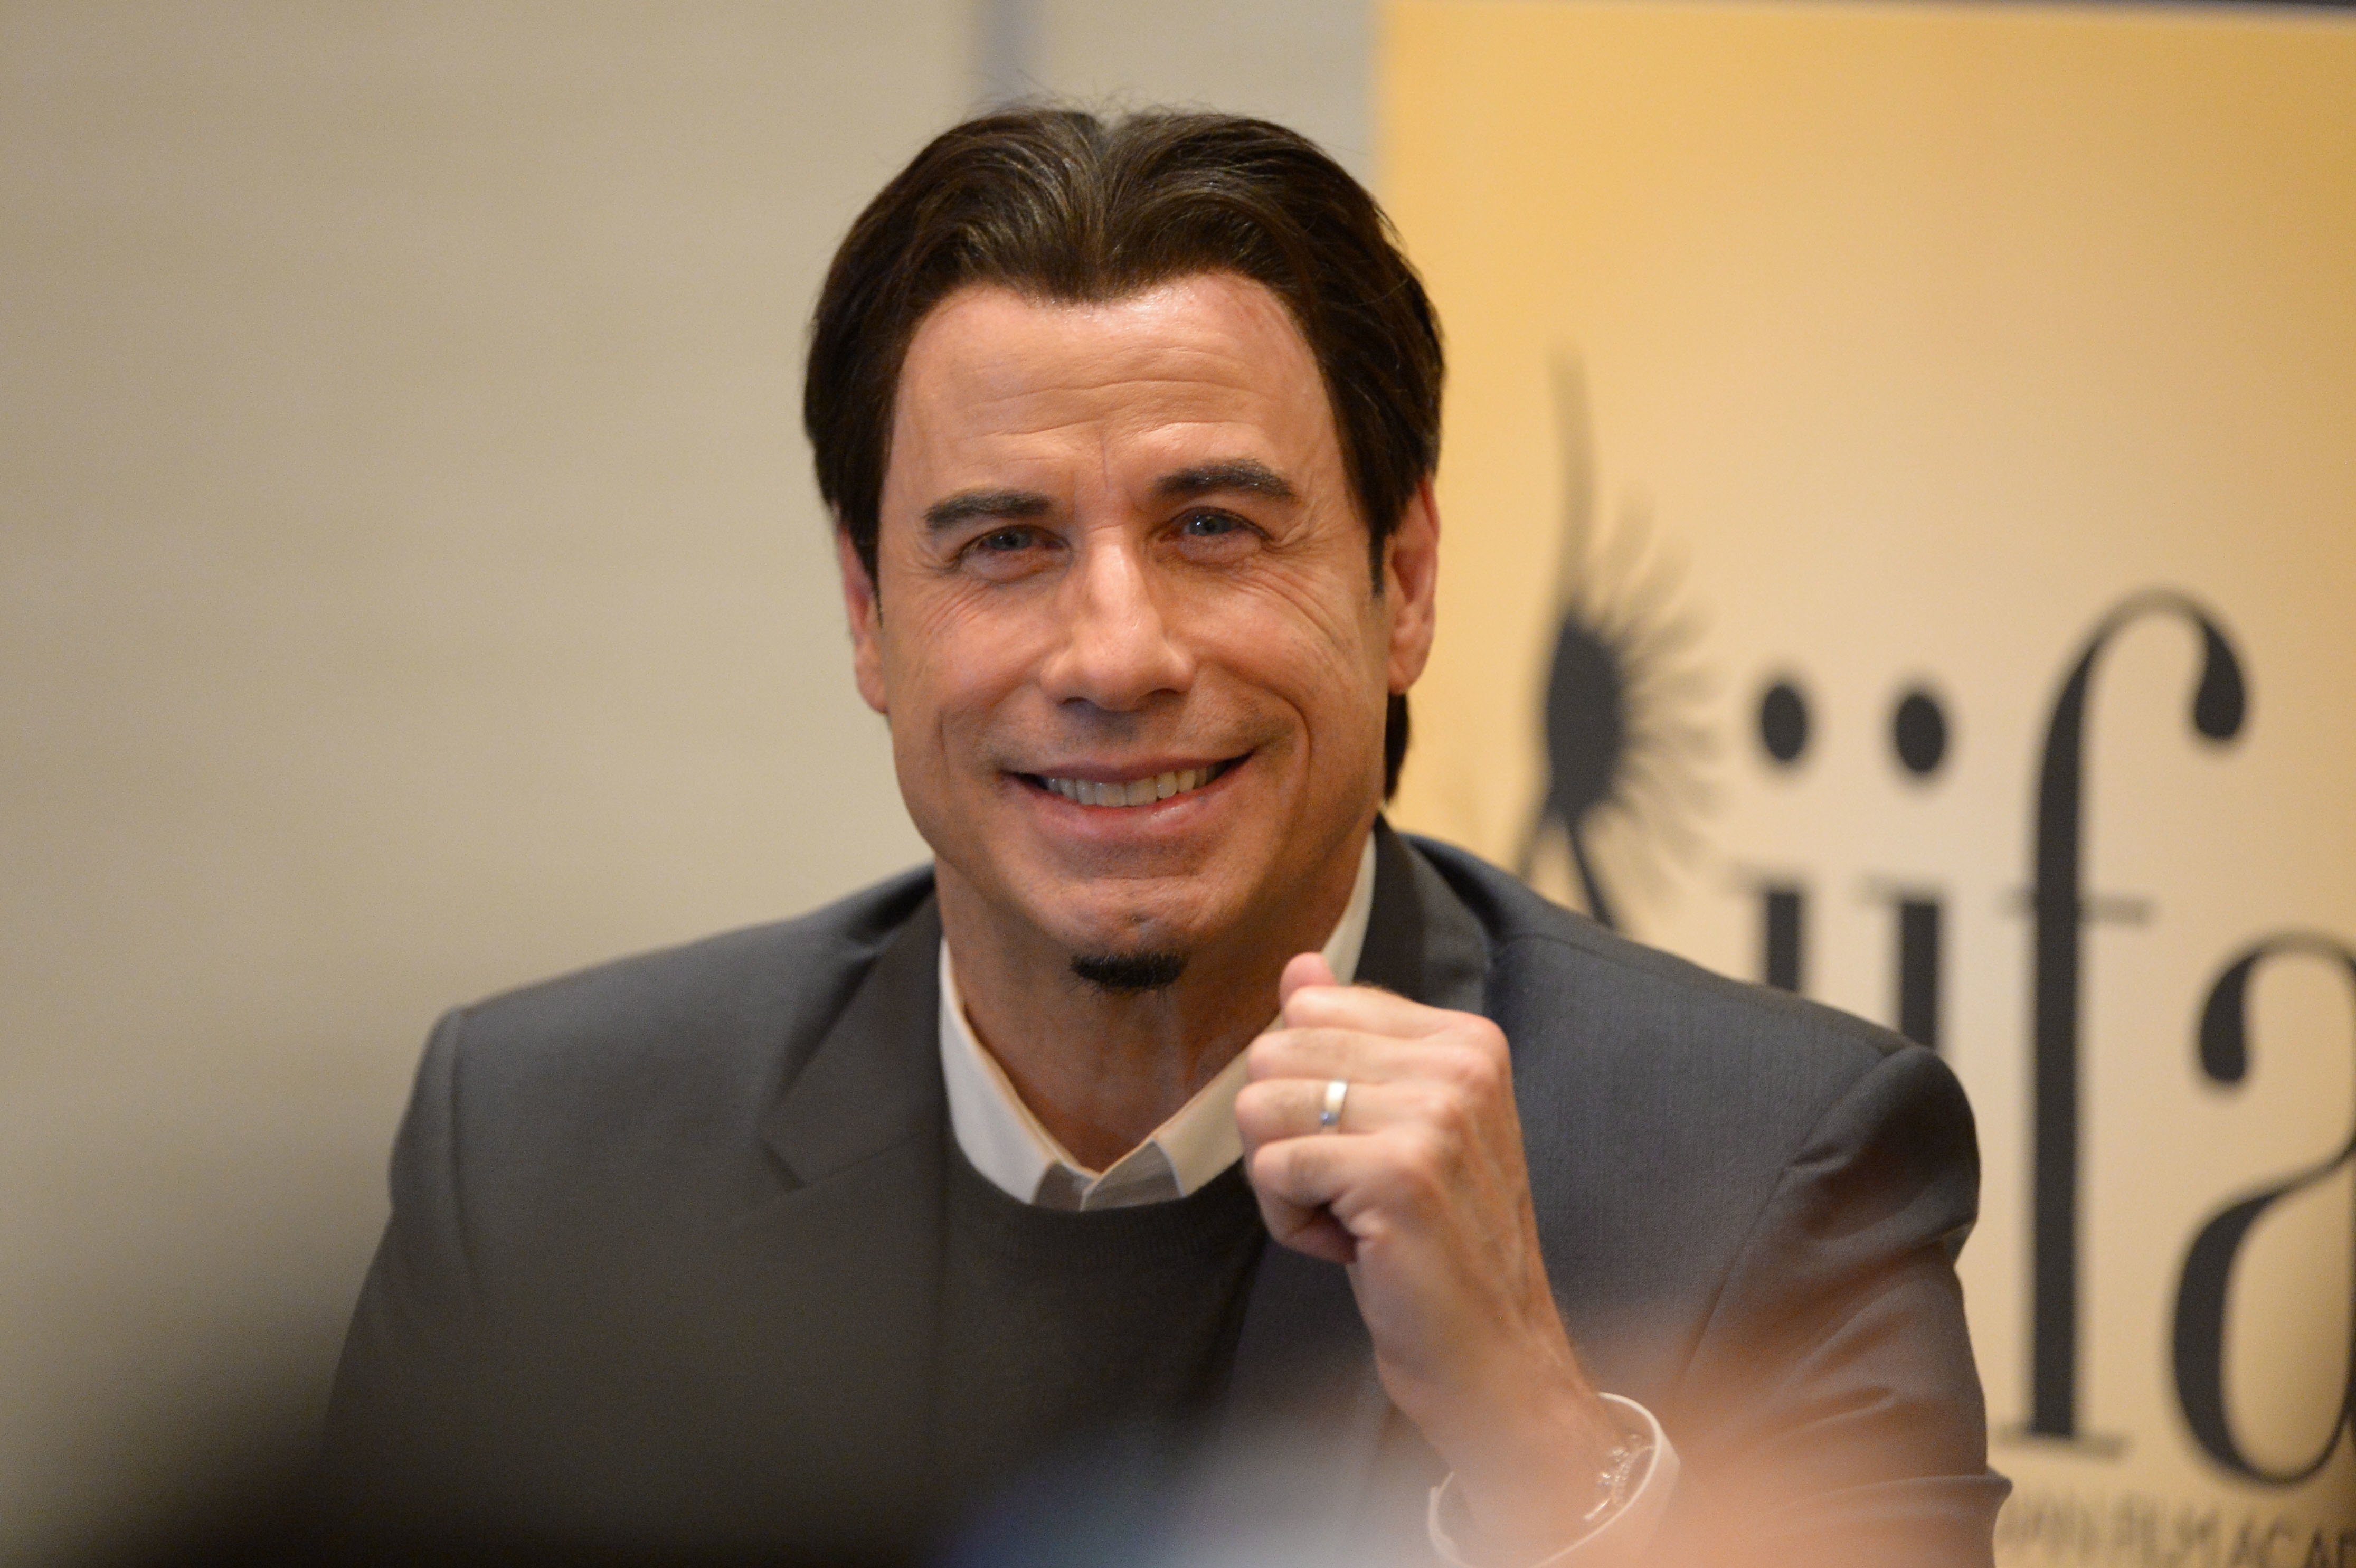 ohn Travolta attends a press conference during the IIFA Awards week at Hilton Tampa Downtown on April 26, 2014 in Tampa, Florida. | Source: Getty Images